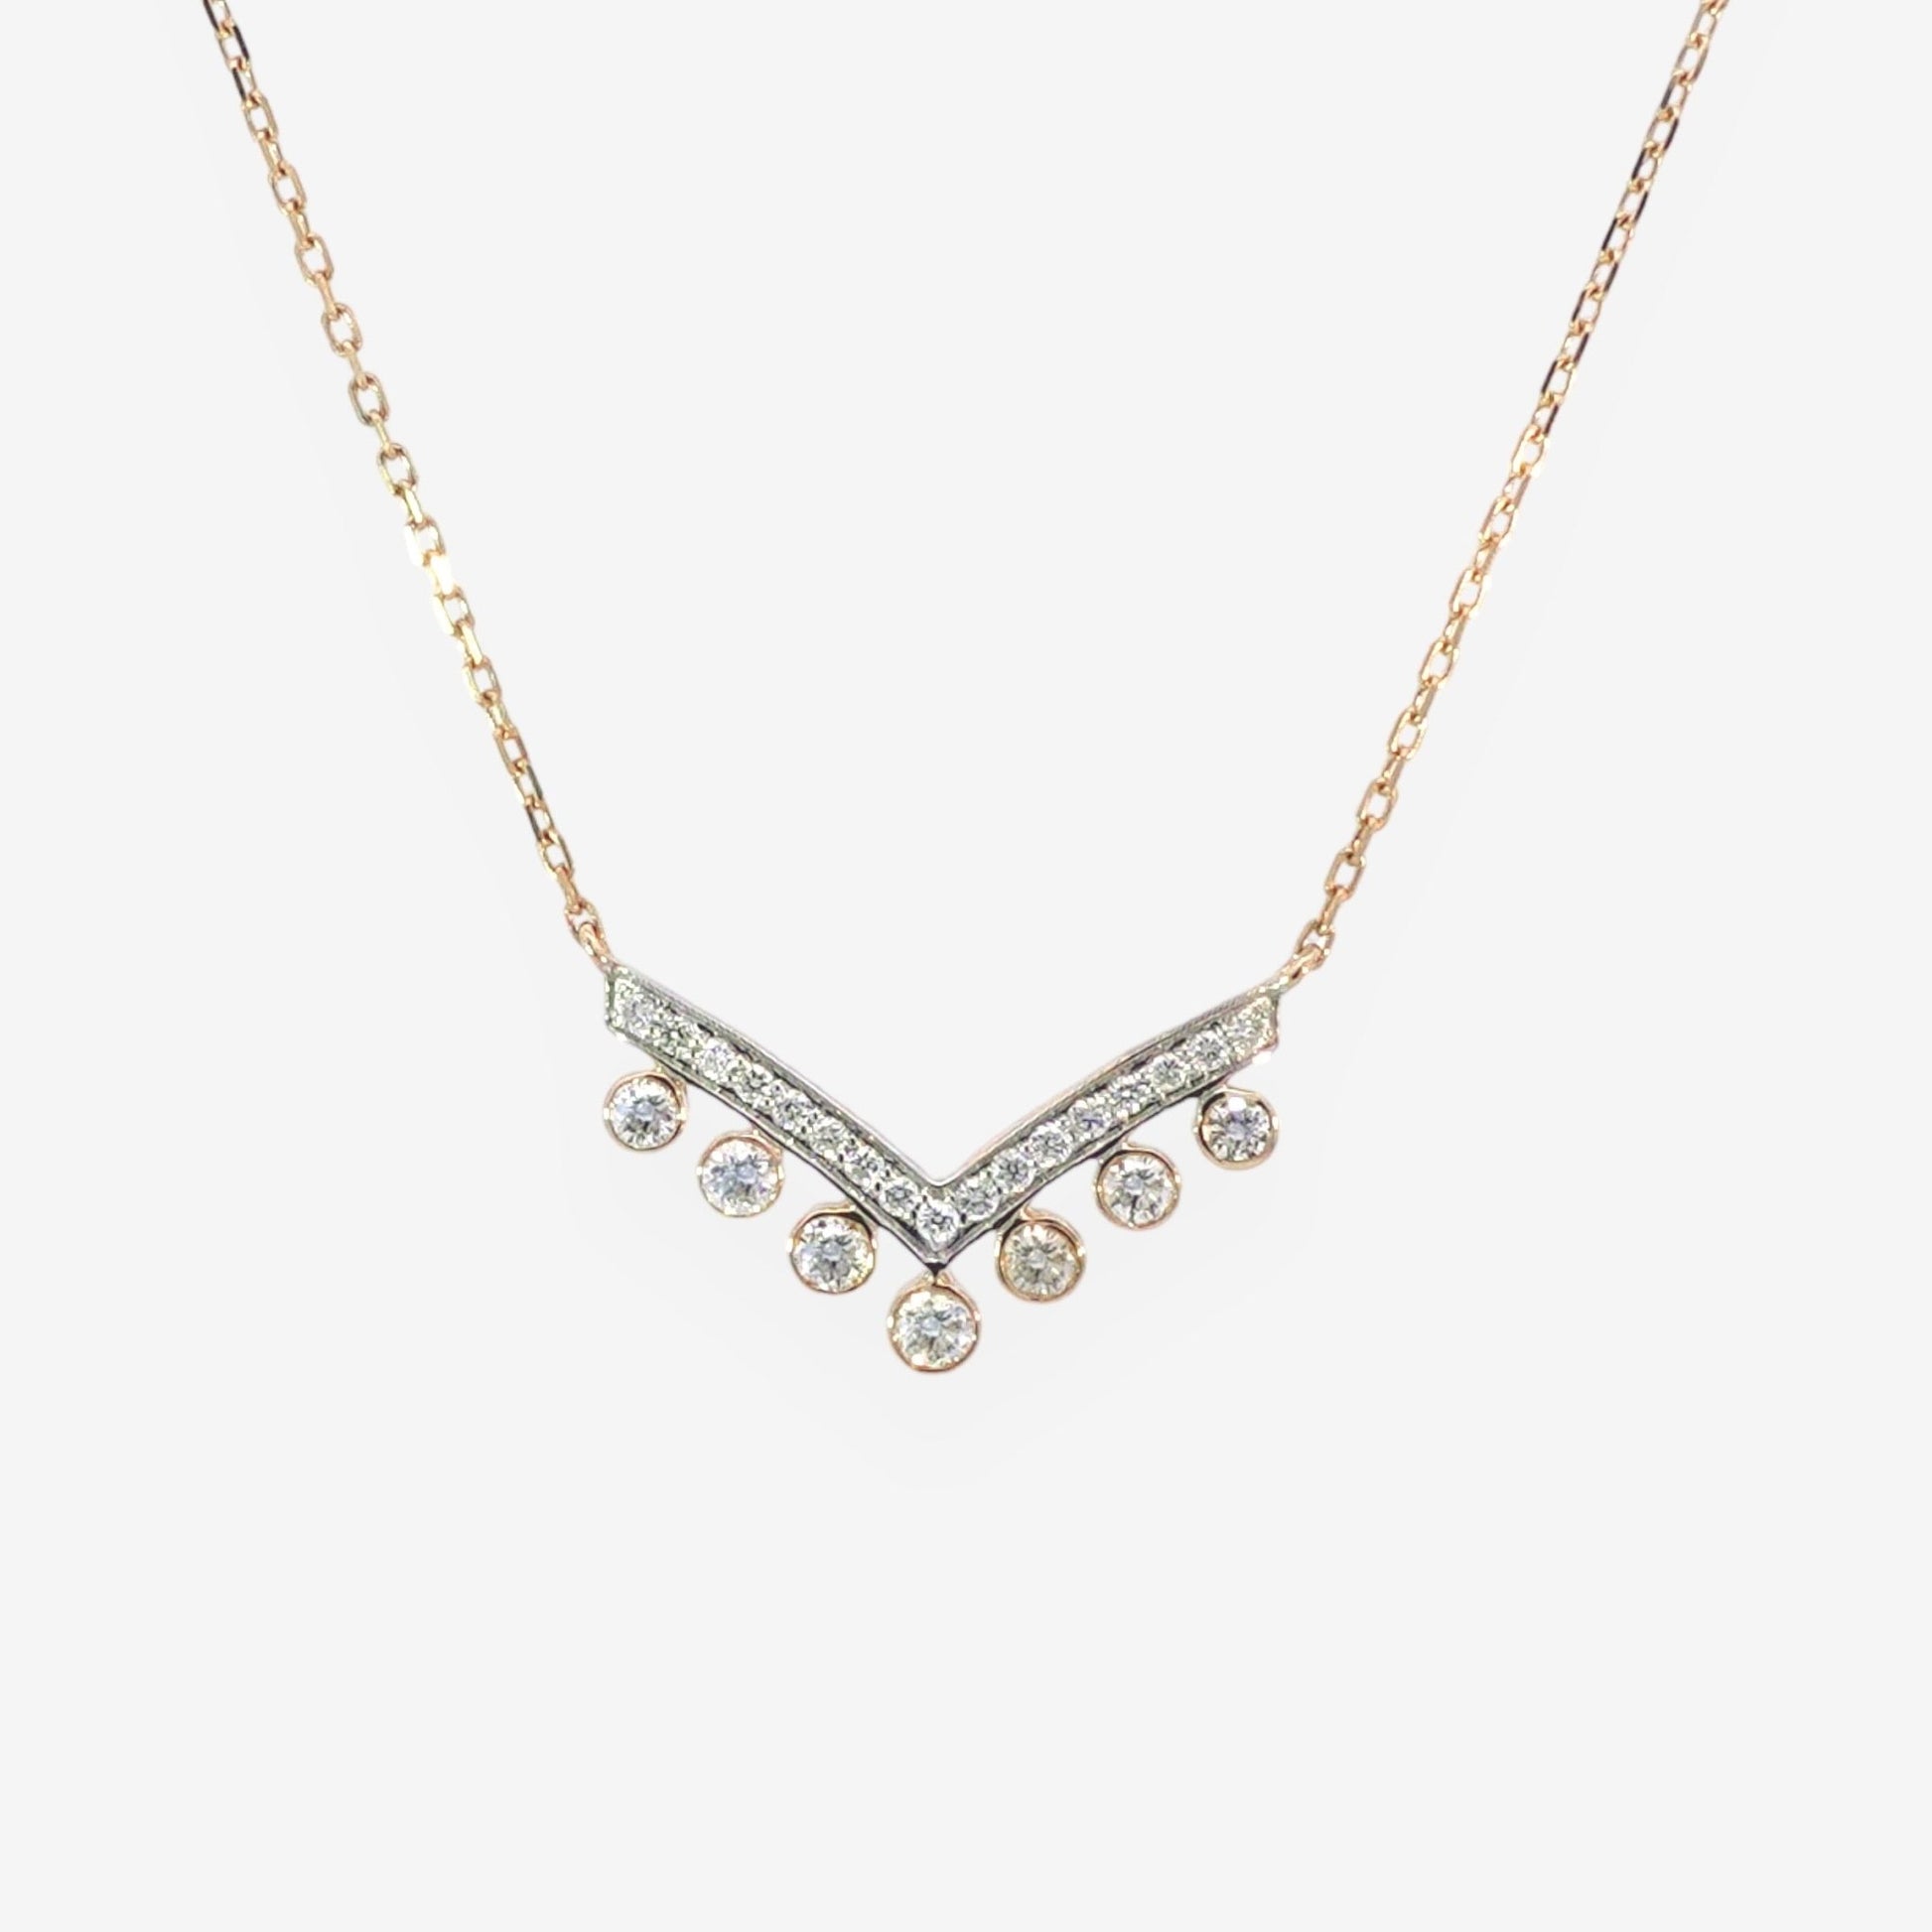 Victory Necklace in Diamond - 18k Gold - Lynor